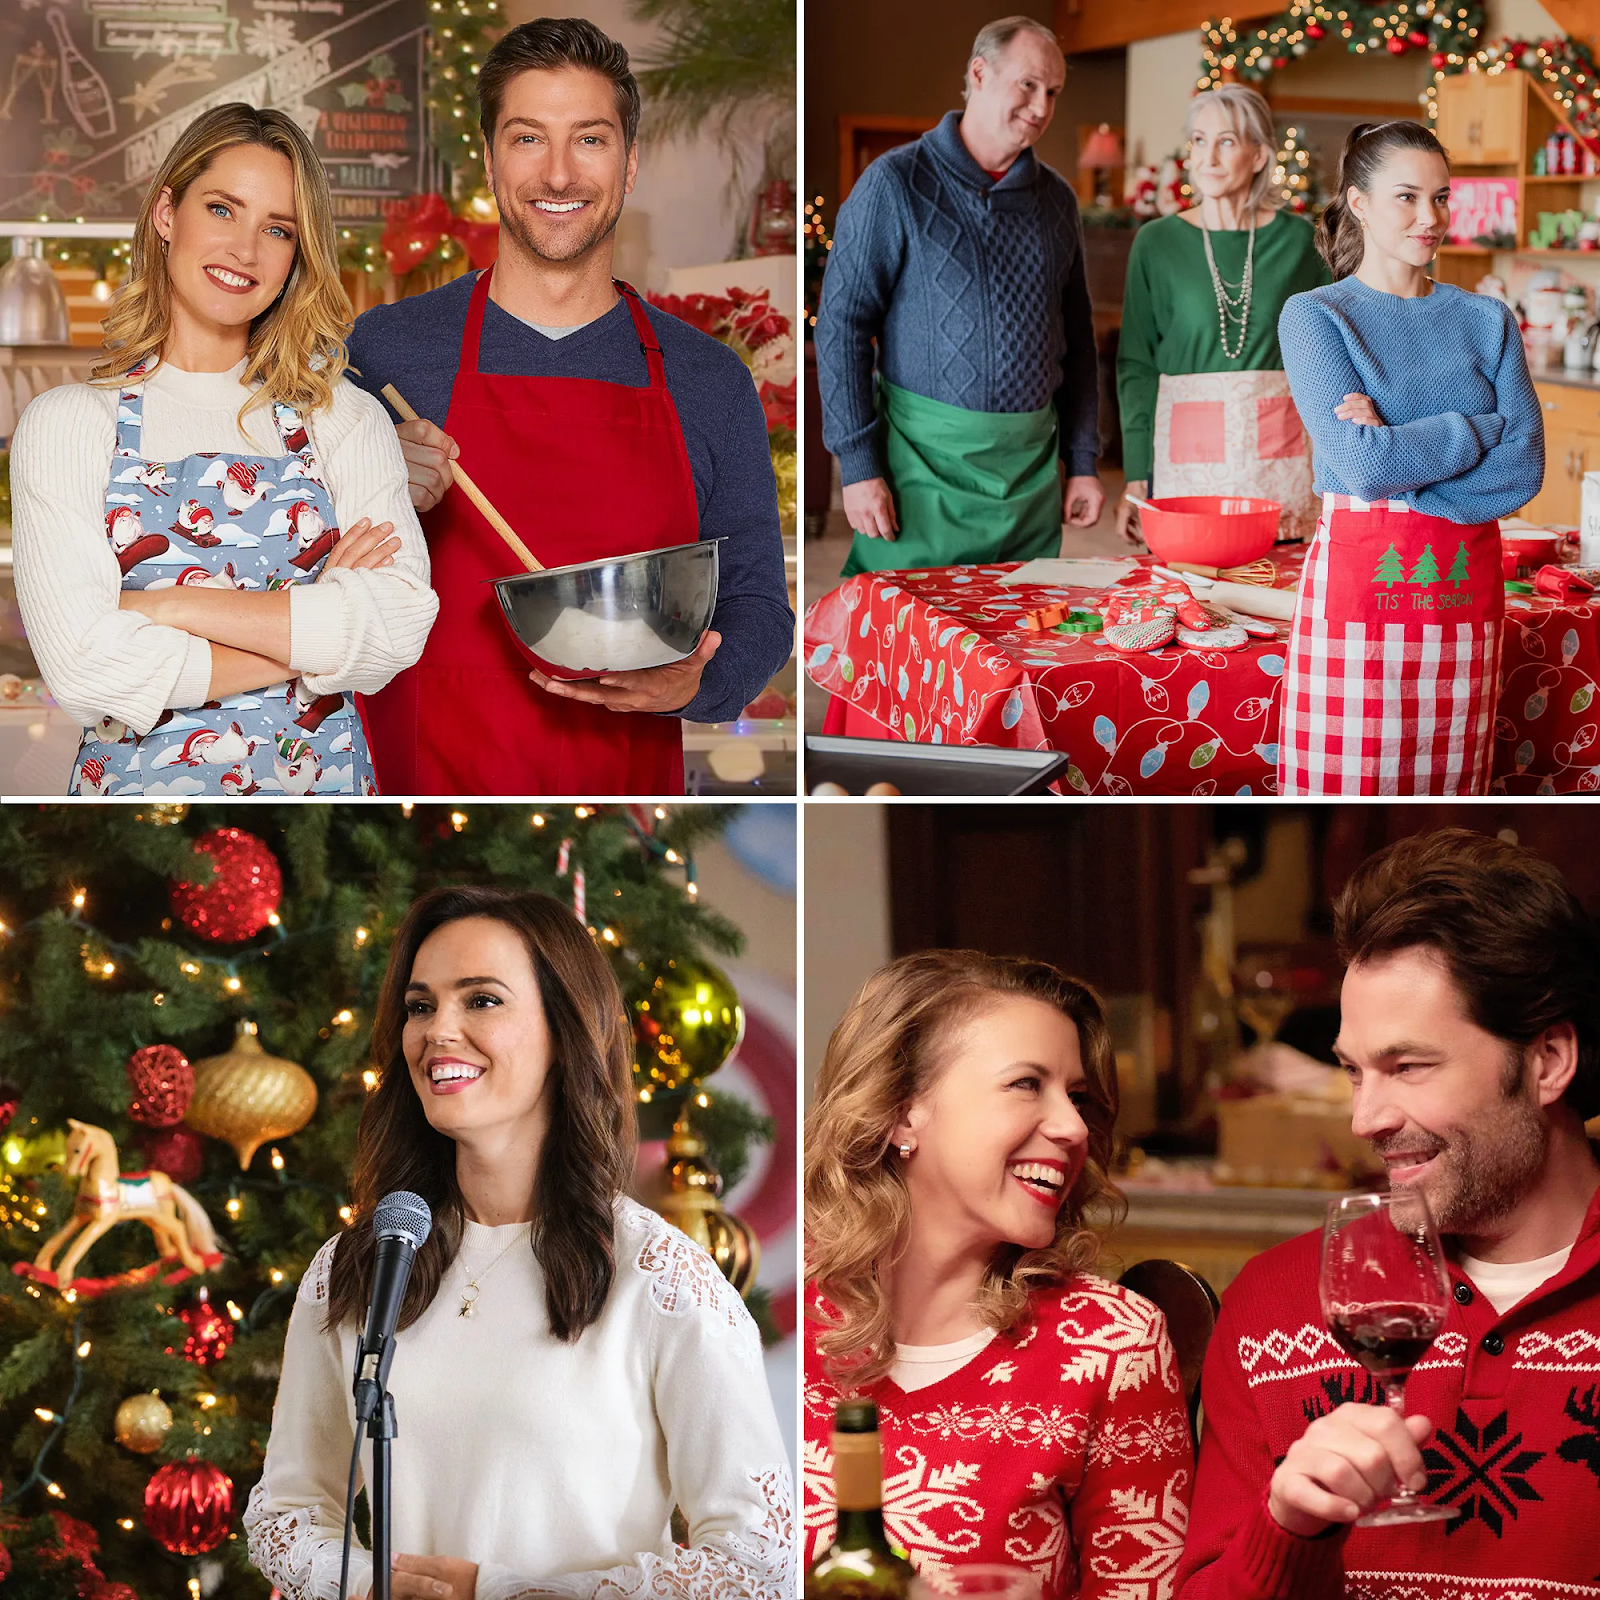 By portraying relatable situations and emotions, Hallmark Christmas movies resonate with viewers from all walks of life